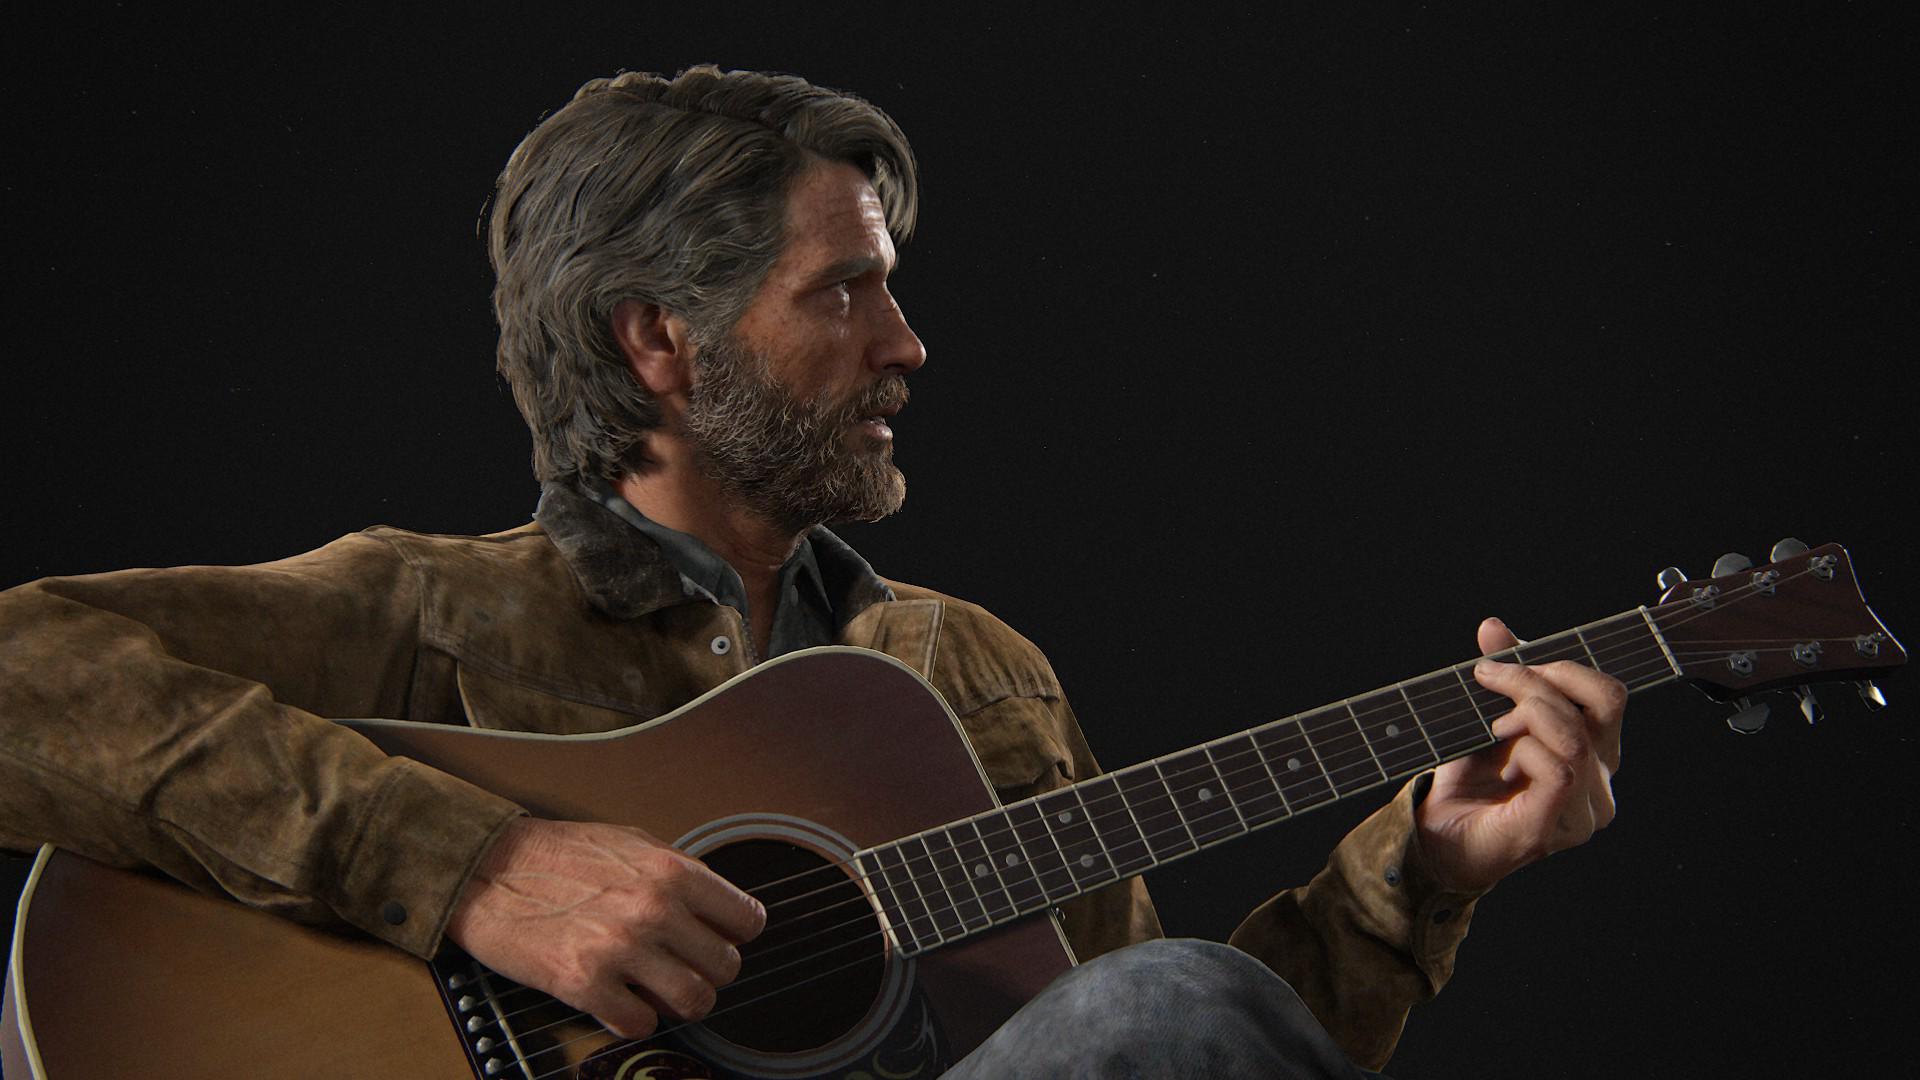 Joel in The Last of Us Part II (Source: Naughty Dog/PlayStation/Reproduction)